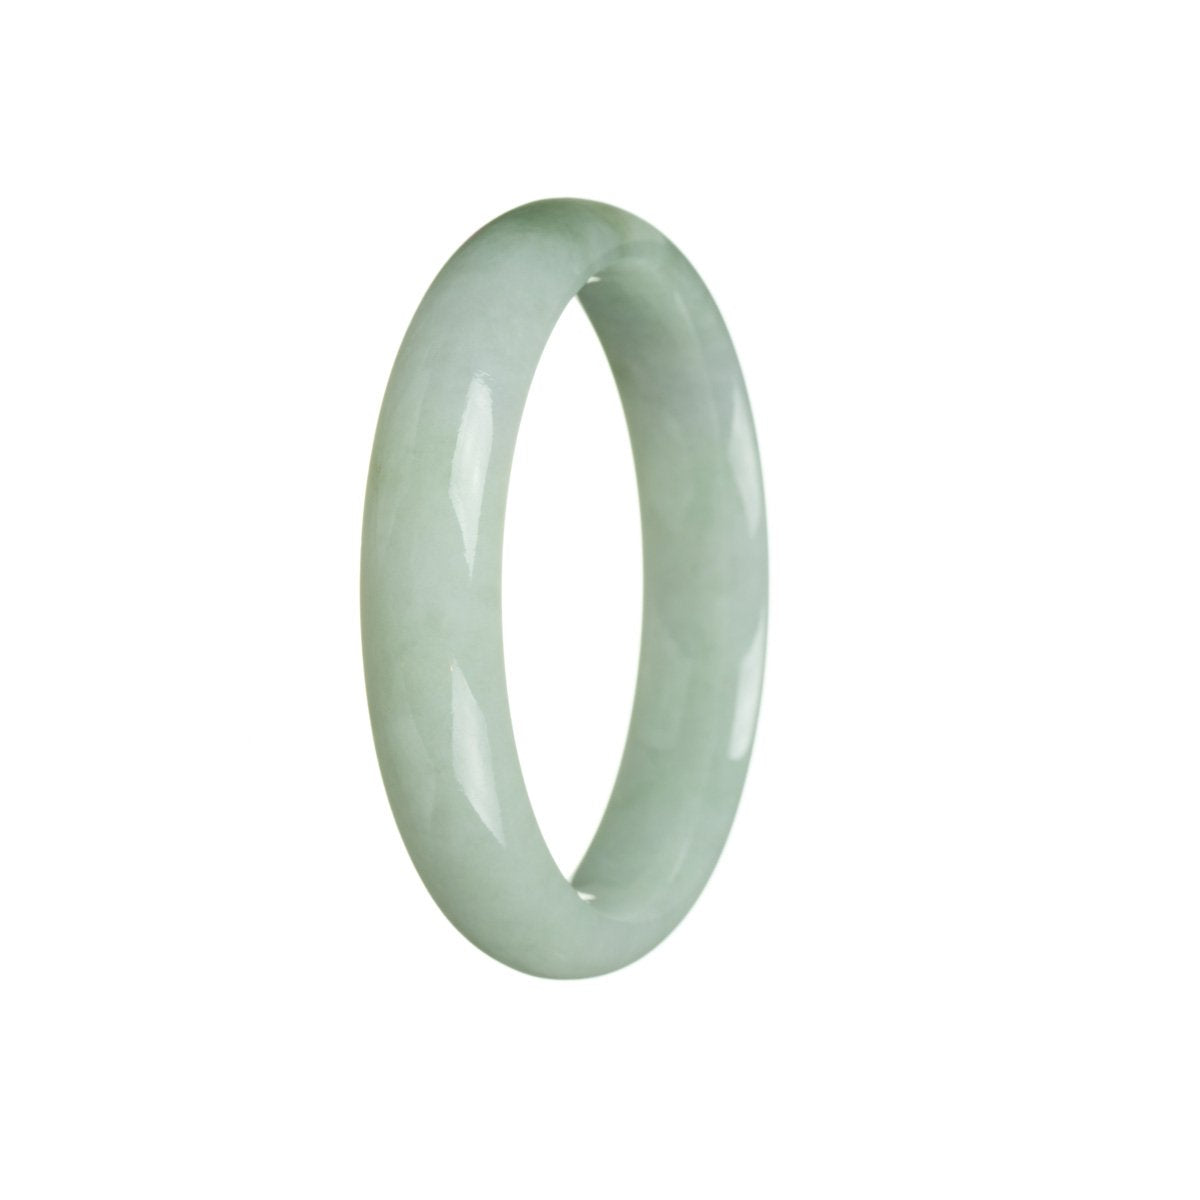 A pale green jade bangle bracelet with a certified Grade A rating. It features a unique pattern and is shaped like a half moon, measuring 56mm in diameter. Sold by MAYS.